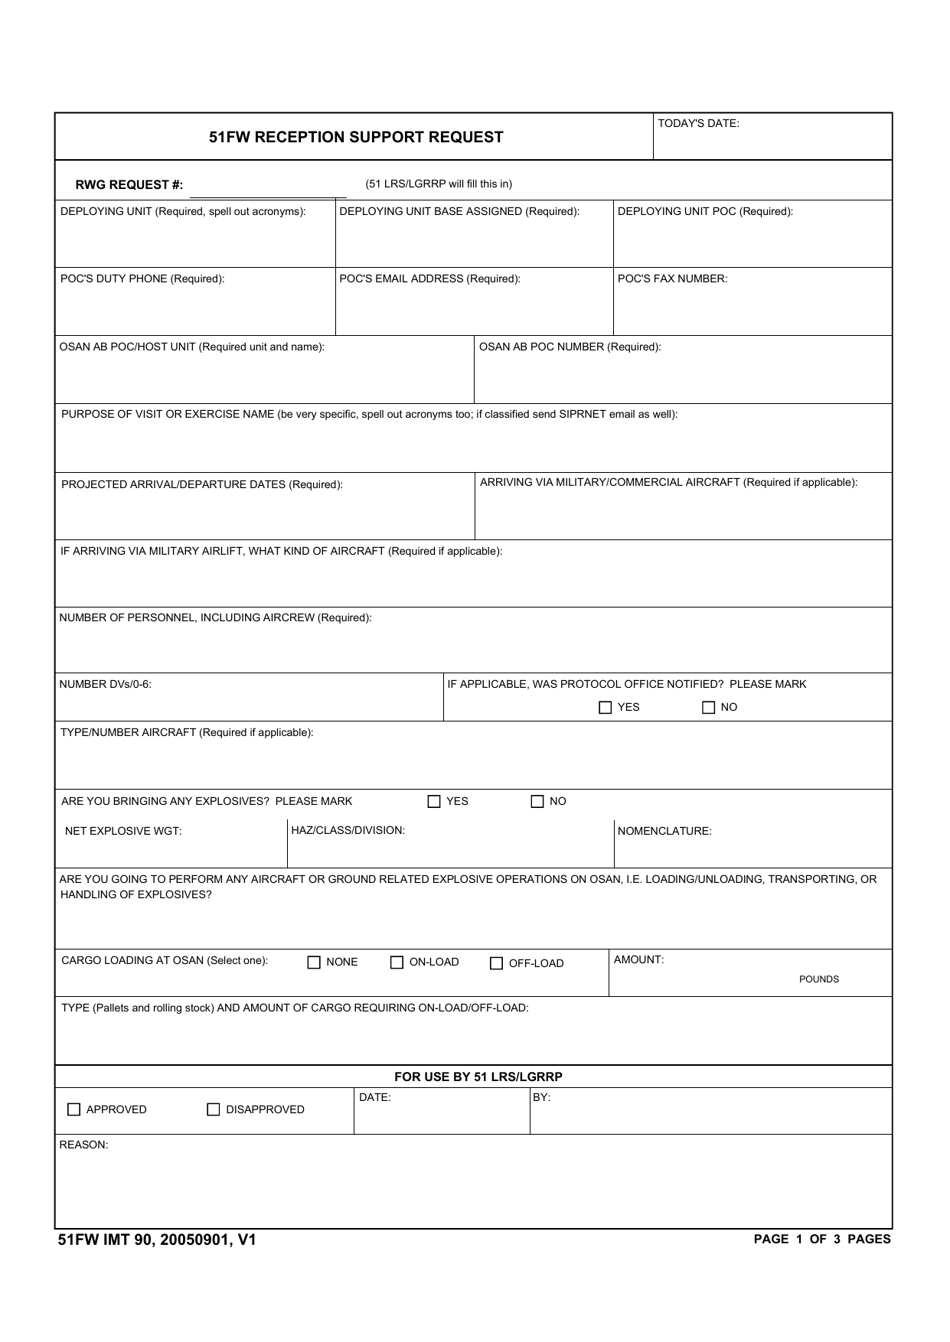 51 FW IMT Form 90 51fw Reception Support Request, Page 1